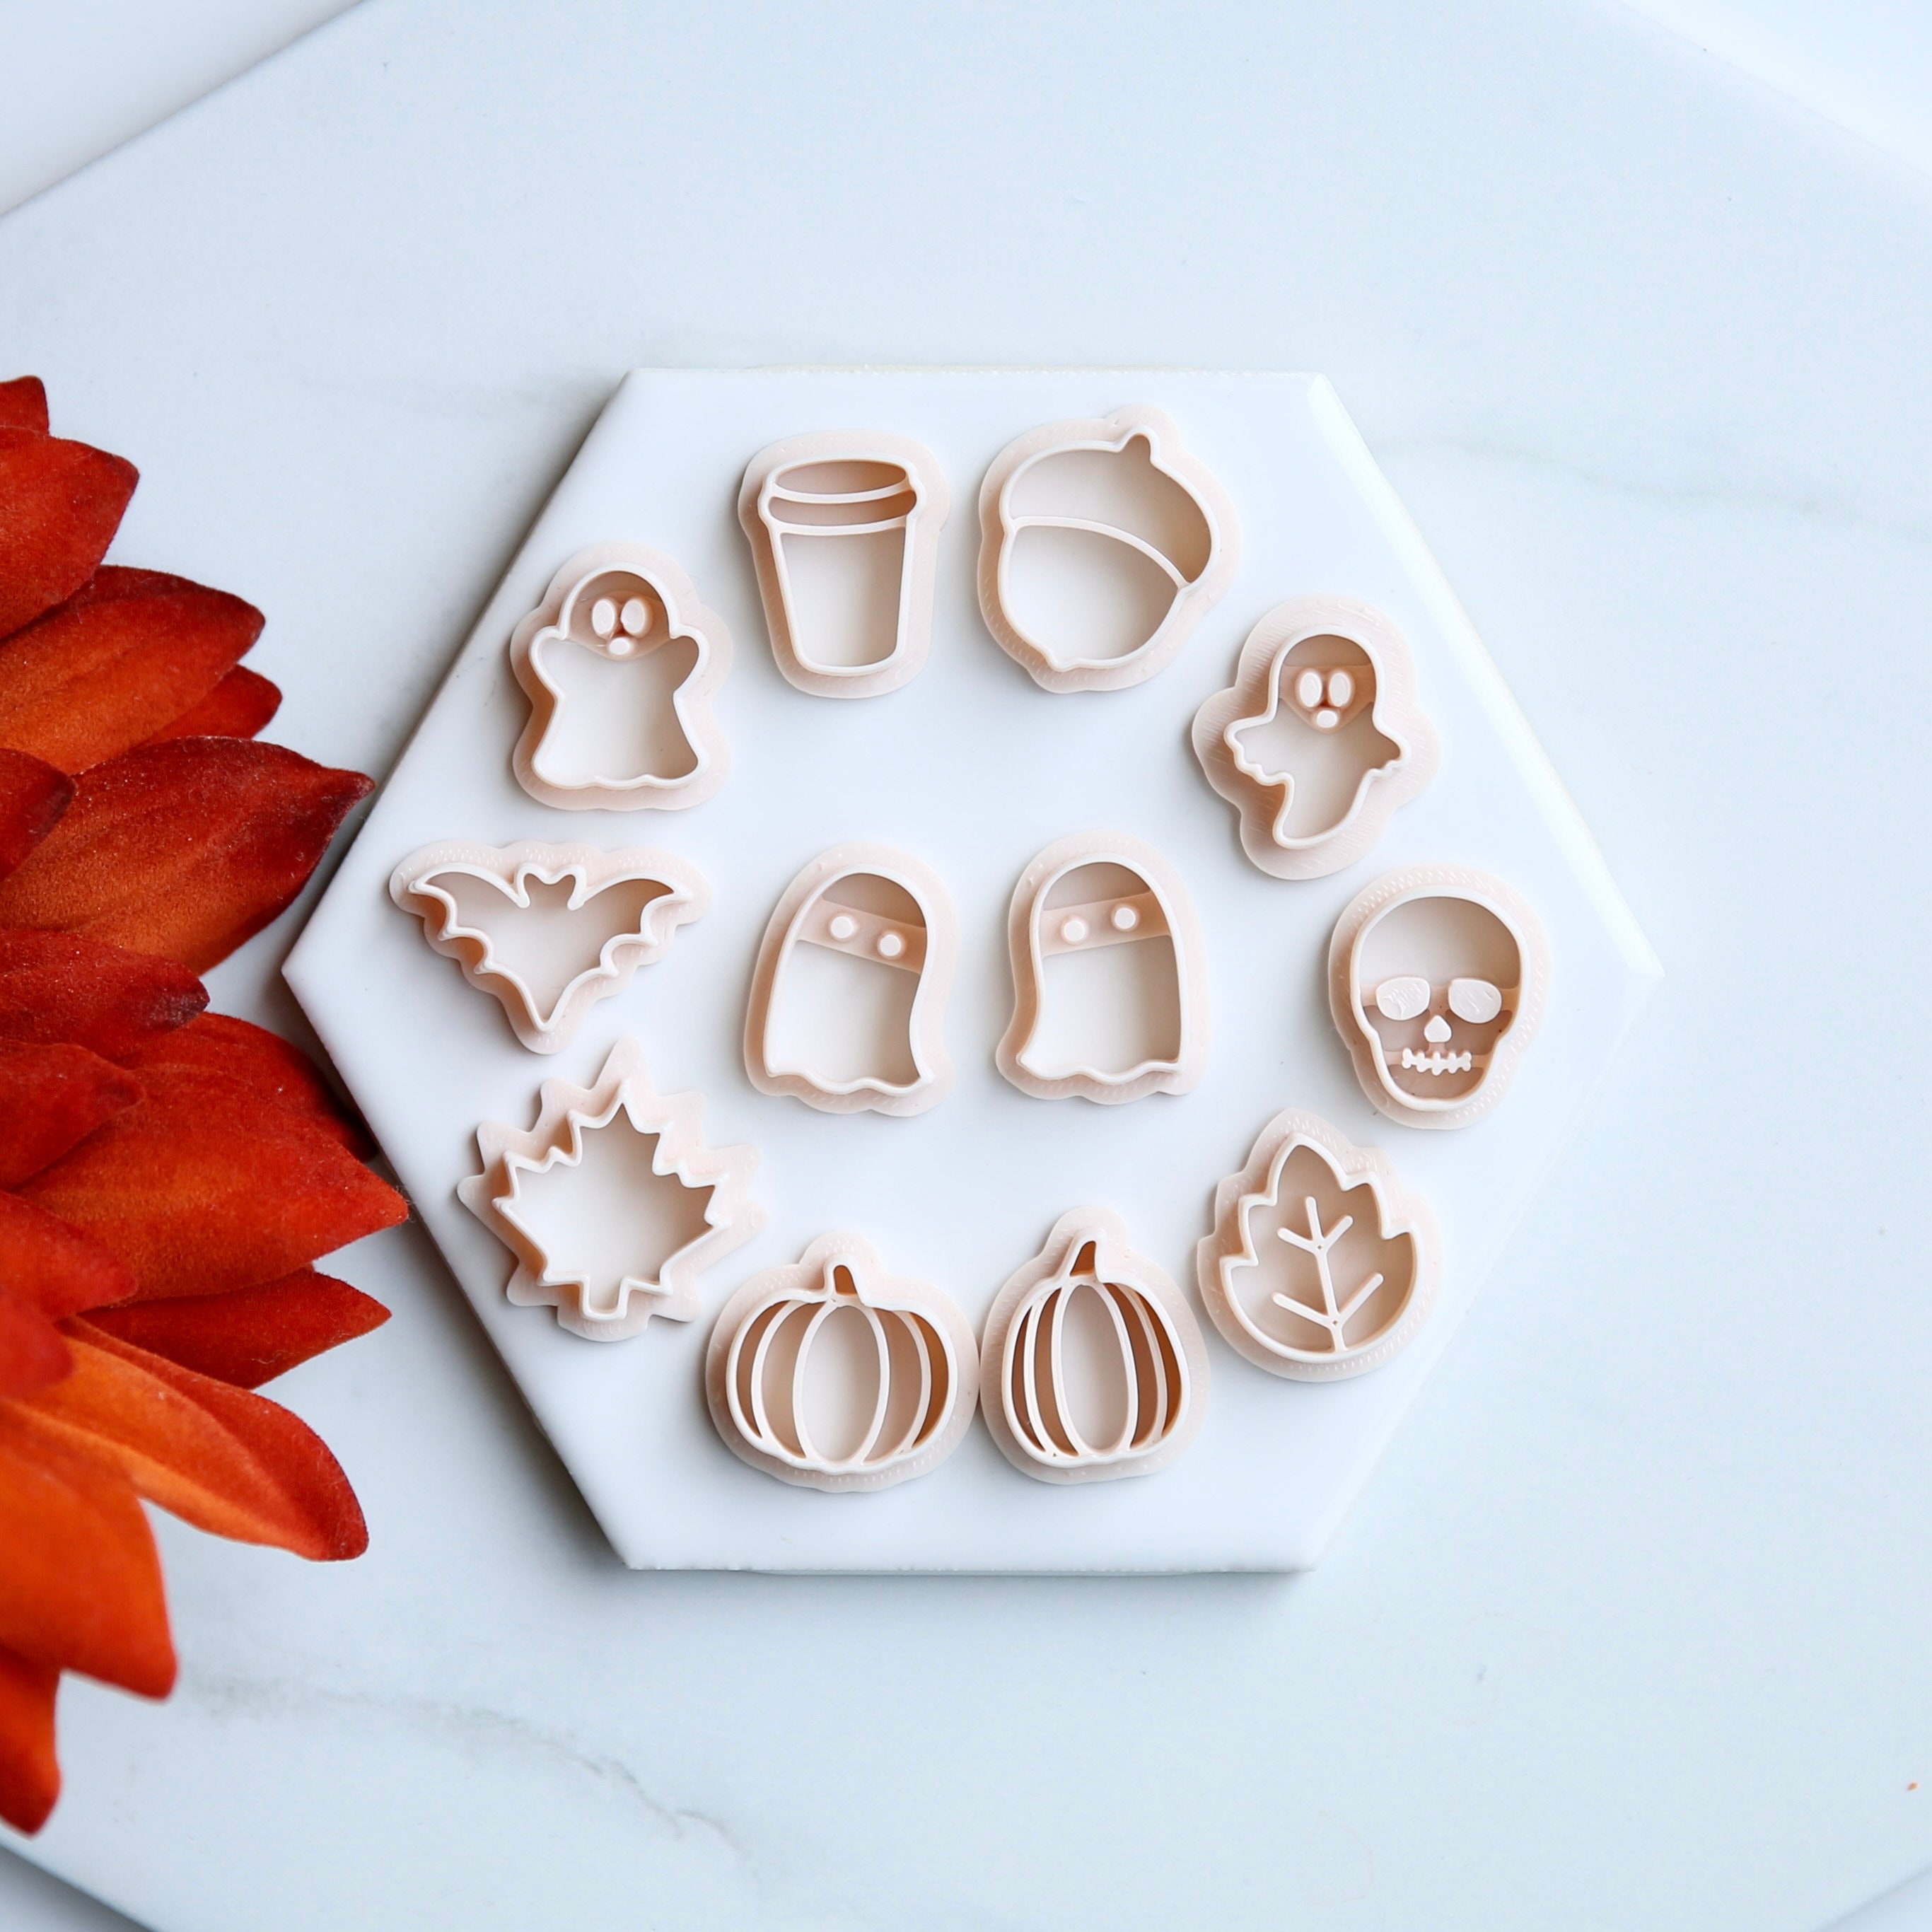 Keoker Polymer Clay Cutters for Fall - Acorn Clay Cutters for Earrings  Making, 10 Shapes Autumn Clay Earrings Cutters, Clay Cutters for Polymer  Clay